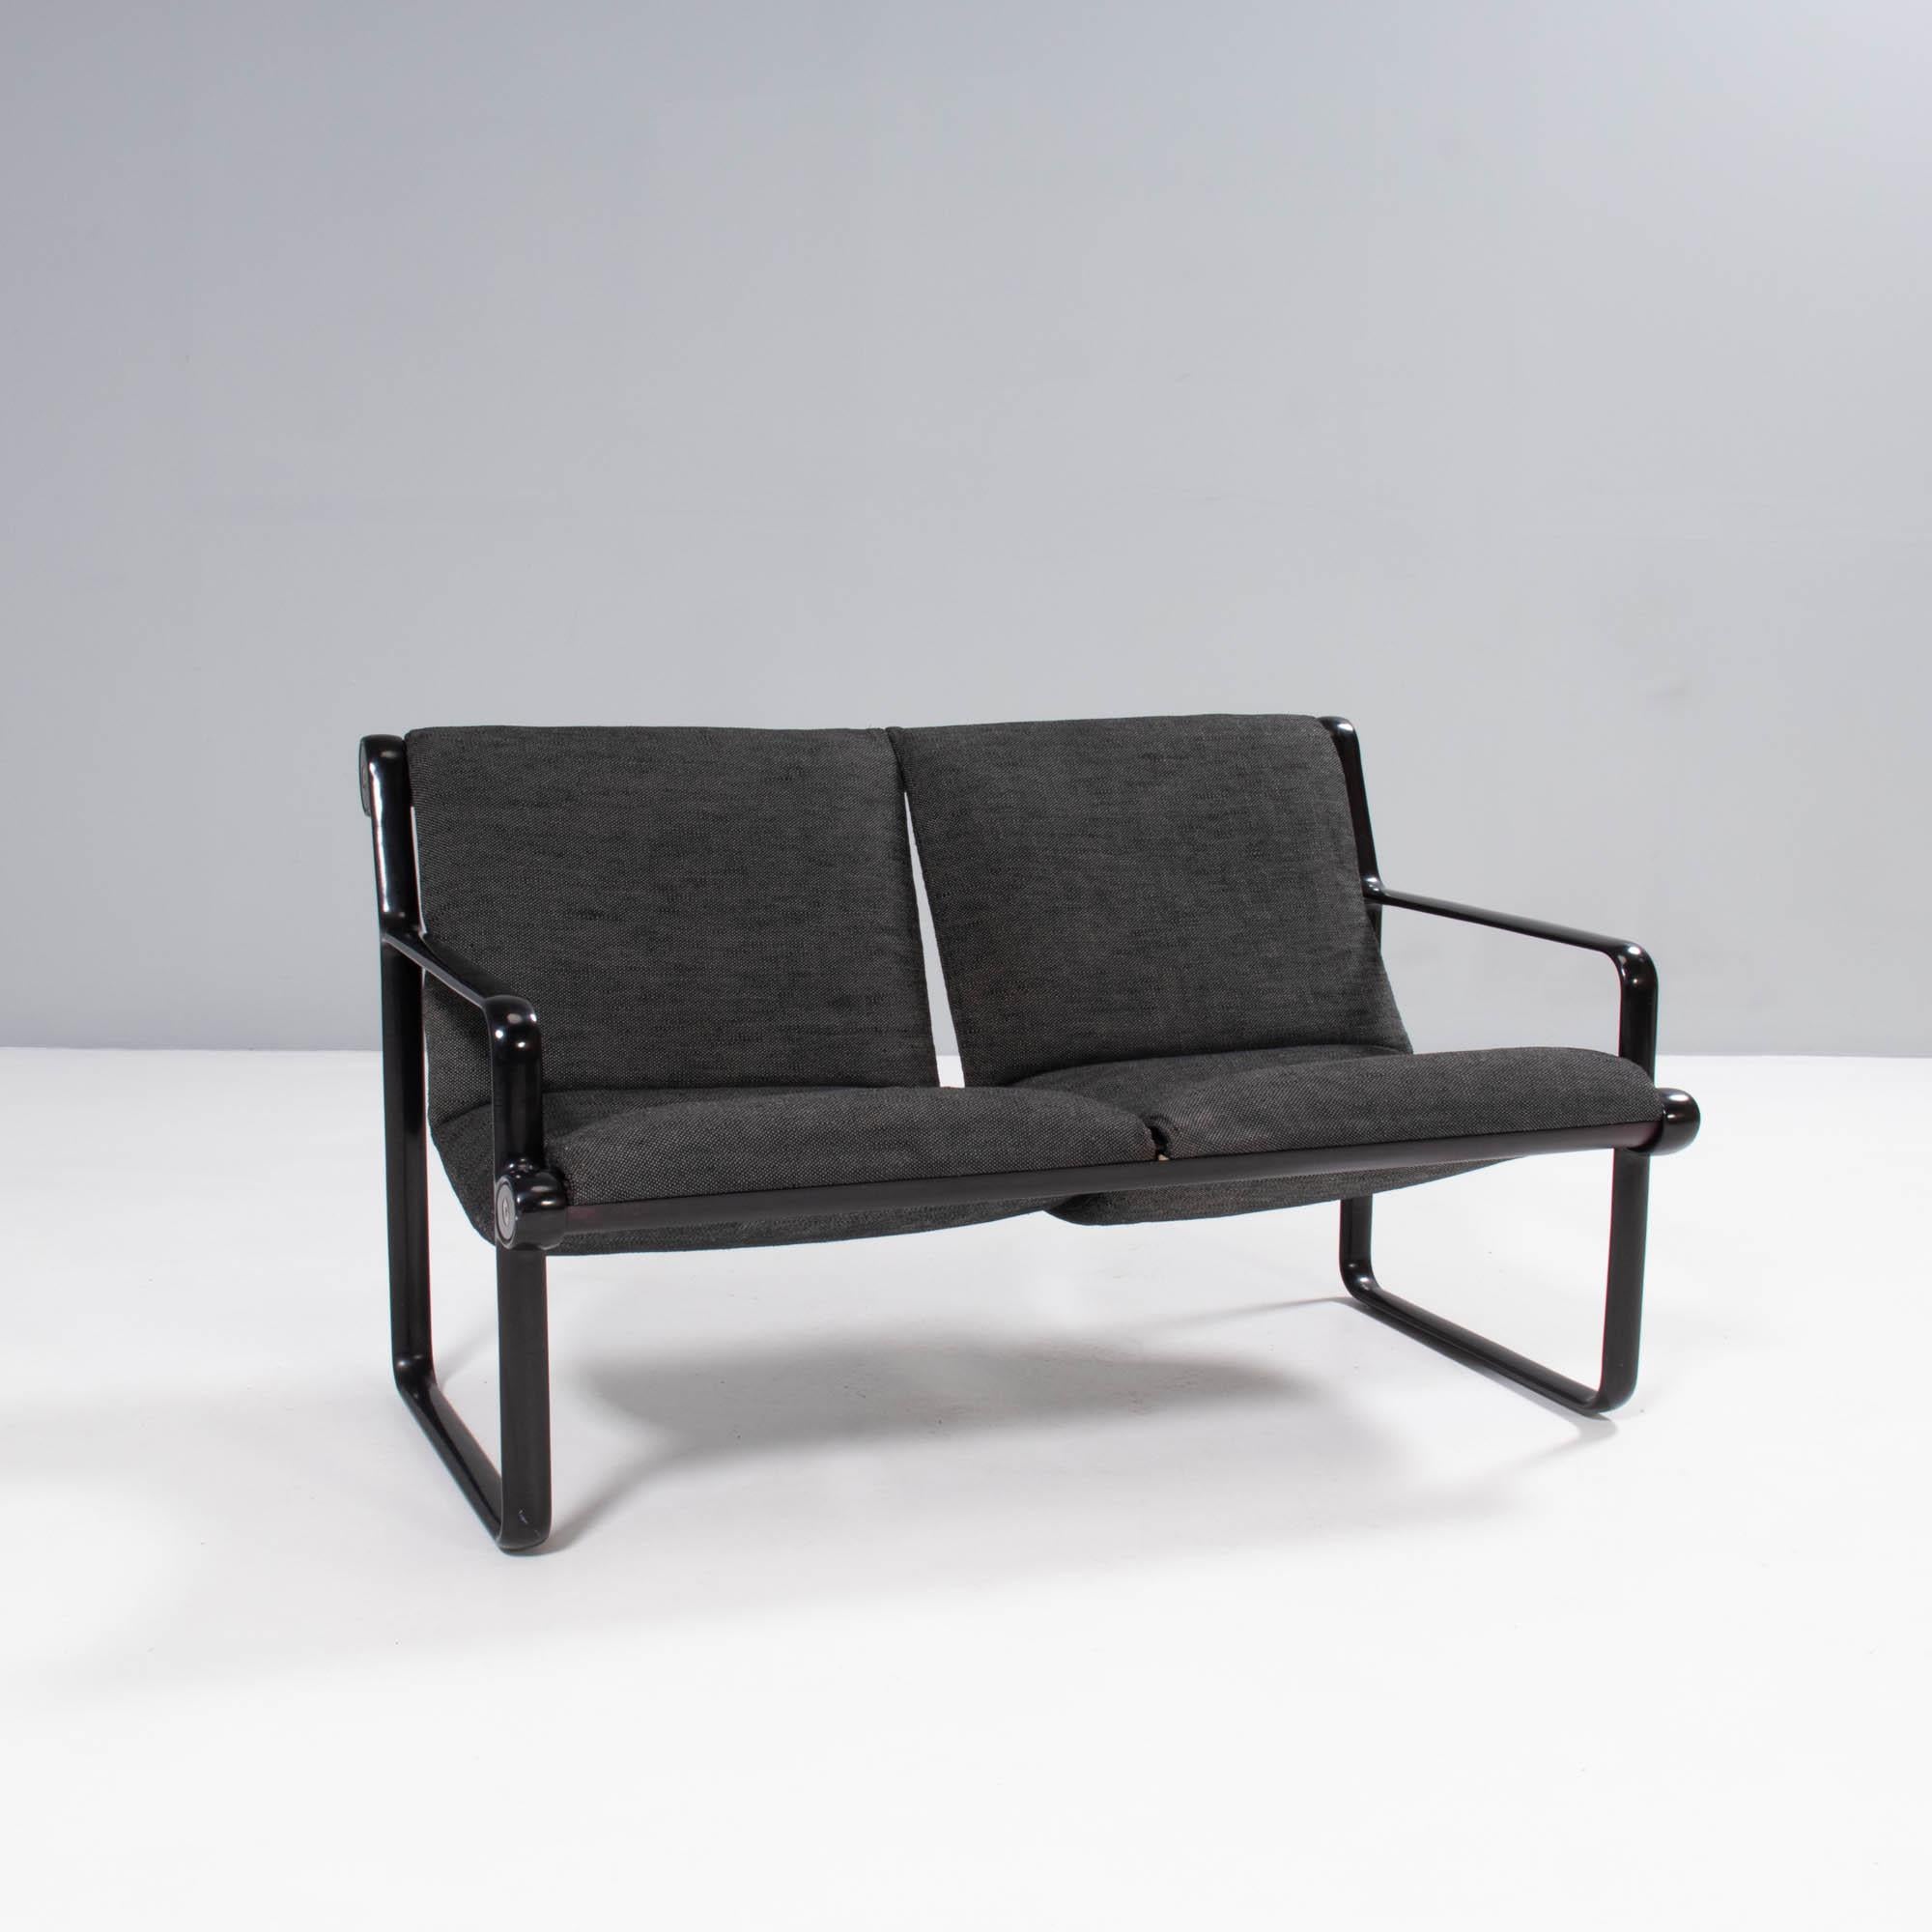 Hannah & Morrison for Knoll Grey Sling Sofa, 1970s In Good Condition For Sale In London, GB